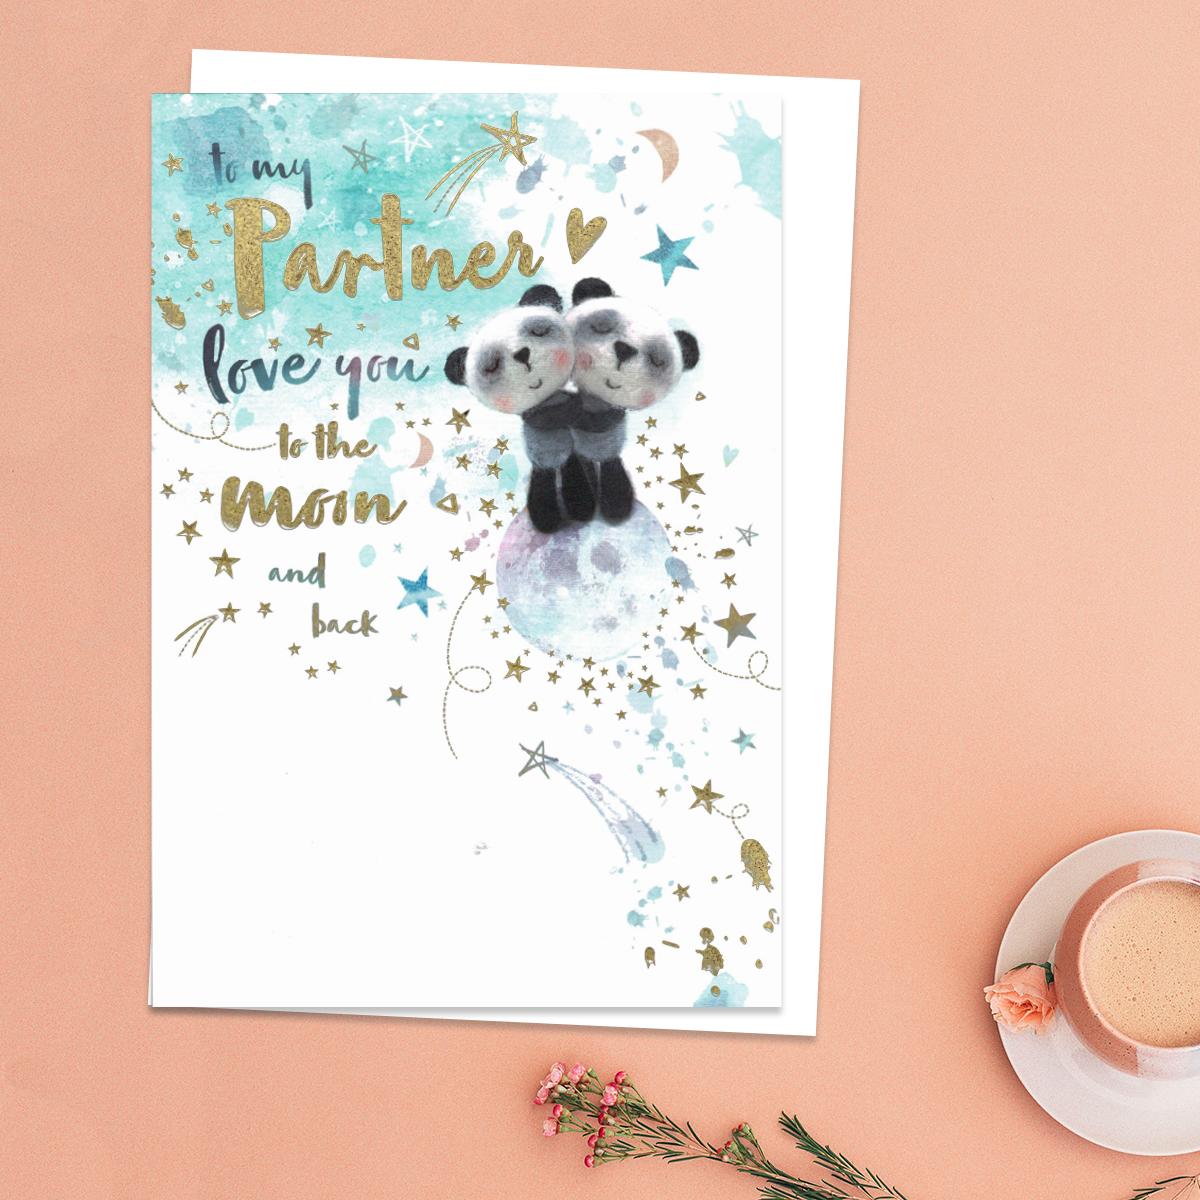 To My Partner Love You To The Moon And Back Birthday Card Featuring Two Cute Pandas Hugging. With Added Gold Foil Detail And White Envelope